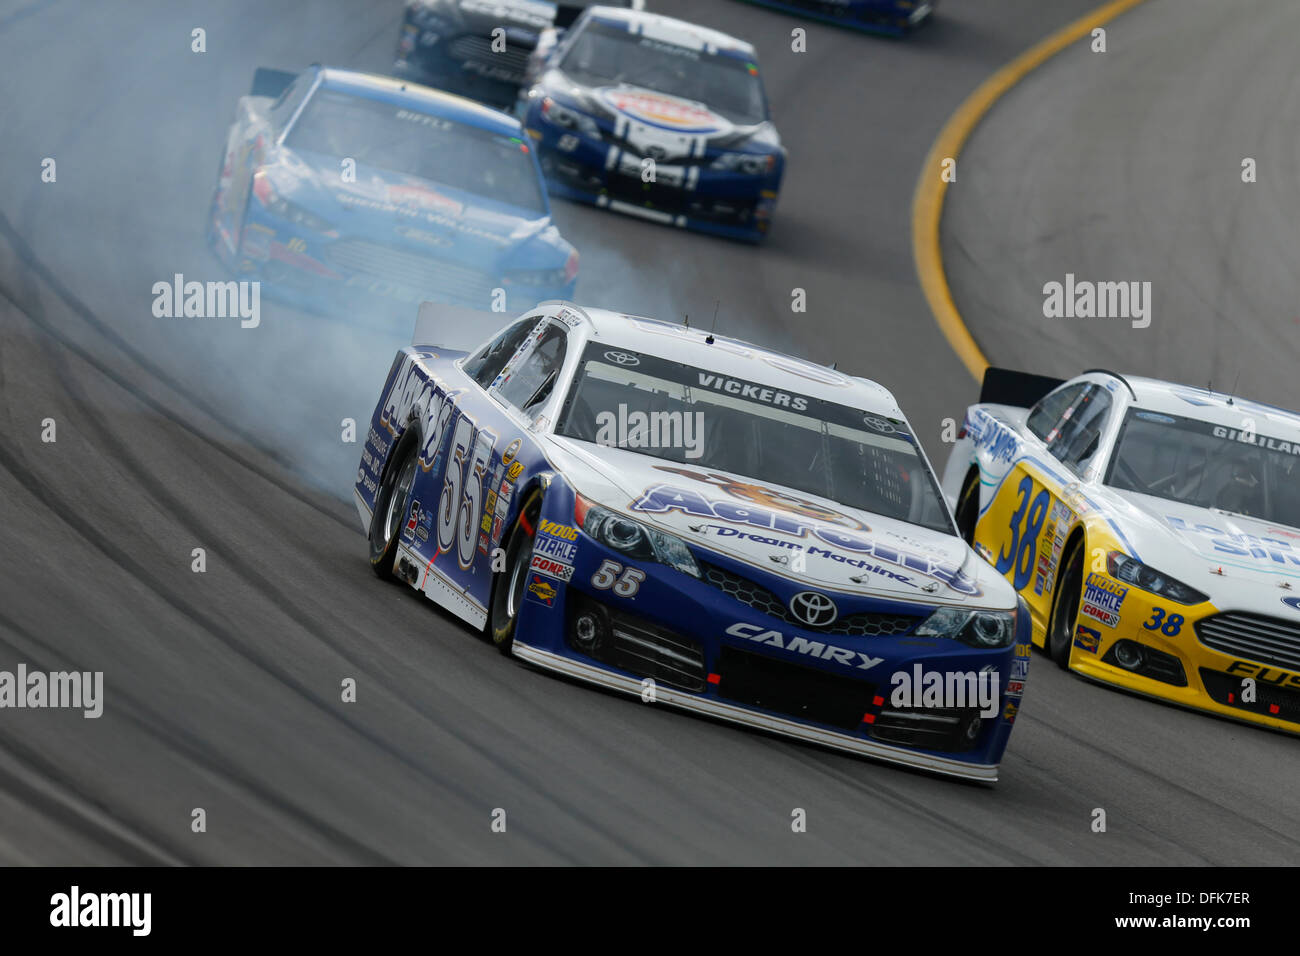 Kansas City, KS, USA. 6th Oct, 2013. October 06, 2013: Smokes come out of the car of Mark Martin, driver of the #55 Aaron's Dream Machine Toyota, during the Nascar Sprint Cup Hollywood Casino 400 at Kansas Speedway in Kansas City, KS. Credit:  csm/Alamy Live News Stock Photo